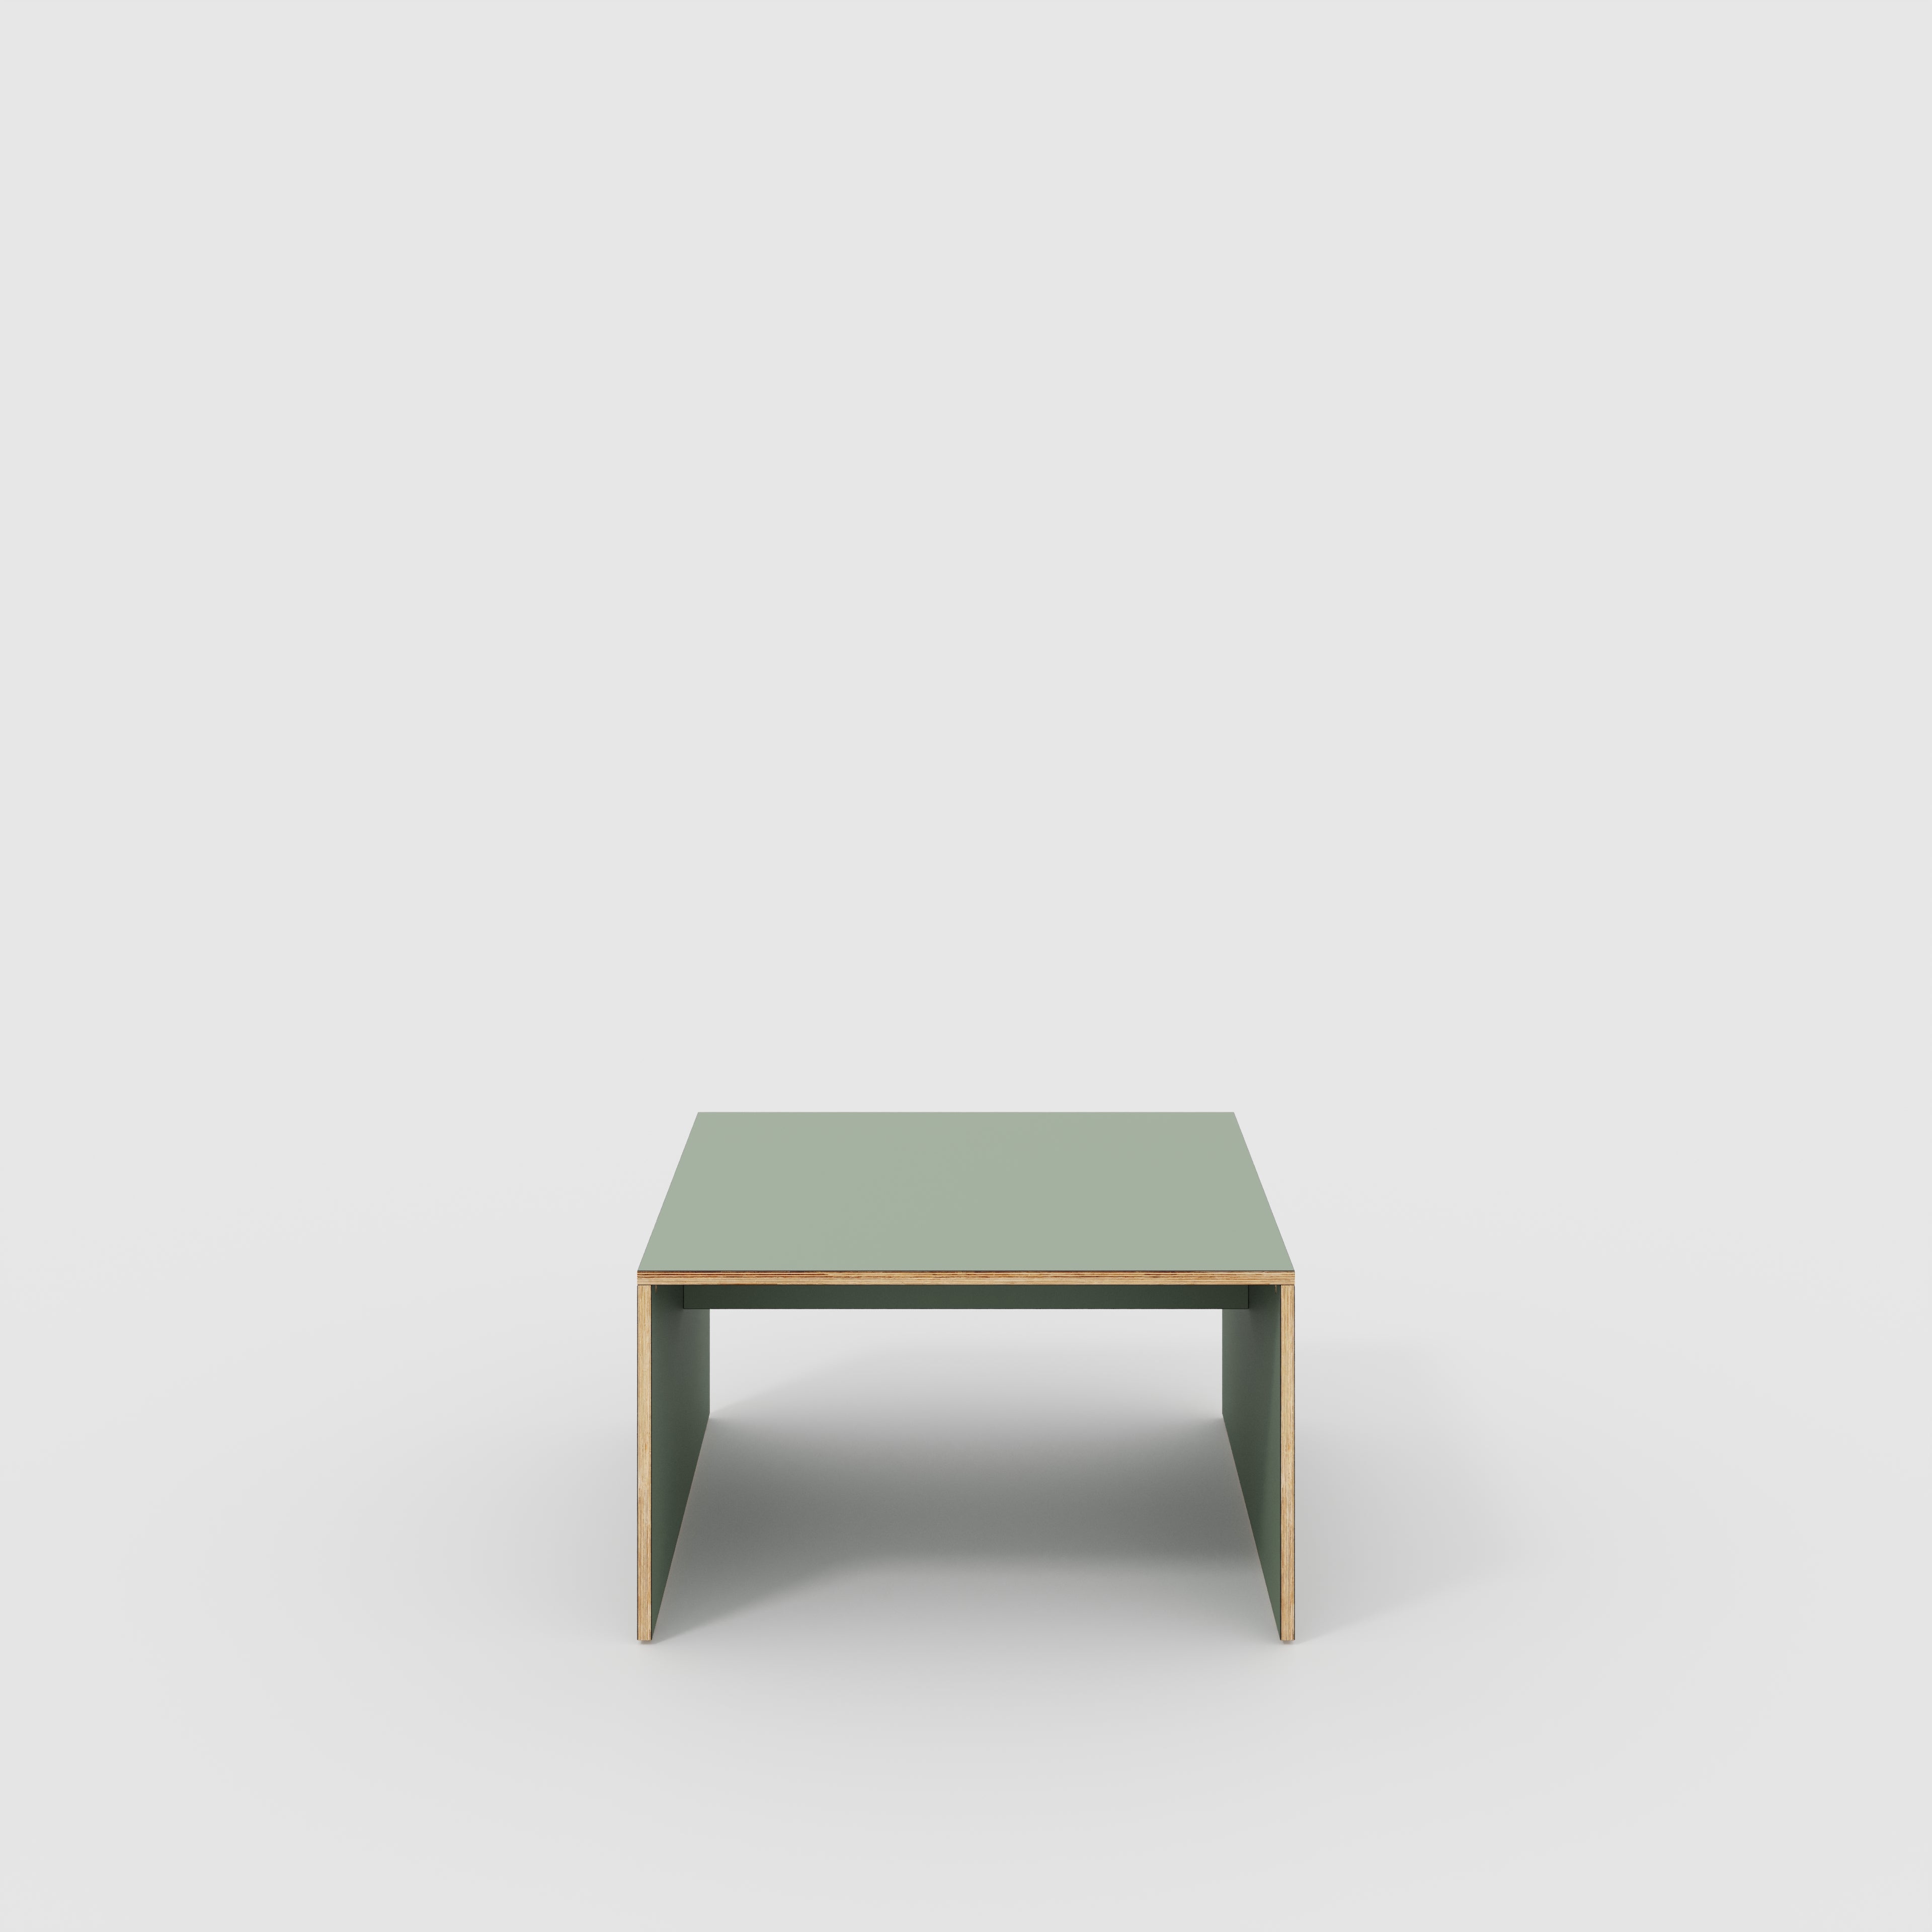 Coffee Table with Solid Sides - Formica Green Slate - 800(w) x 800(d) x 450(h)